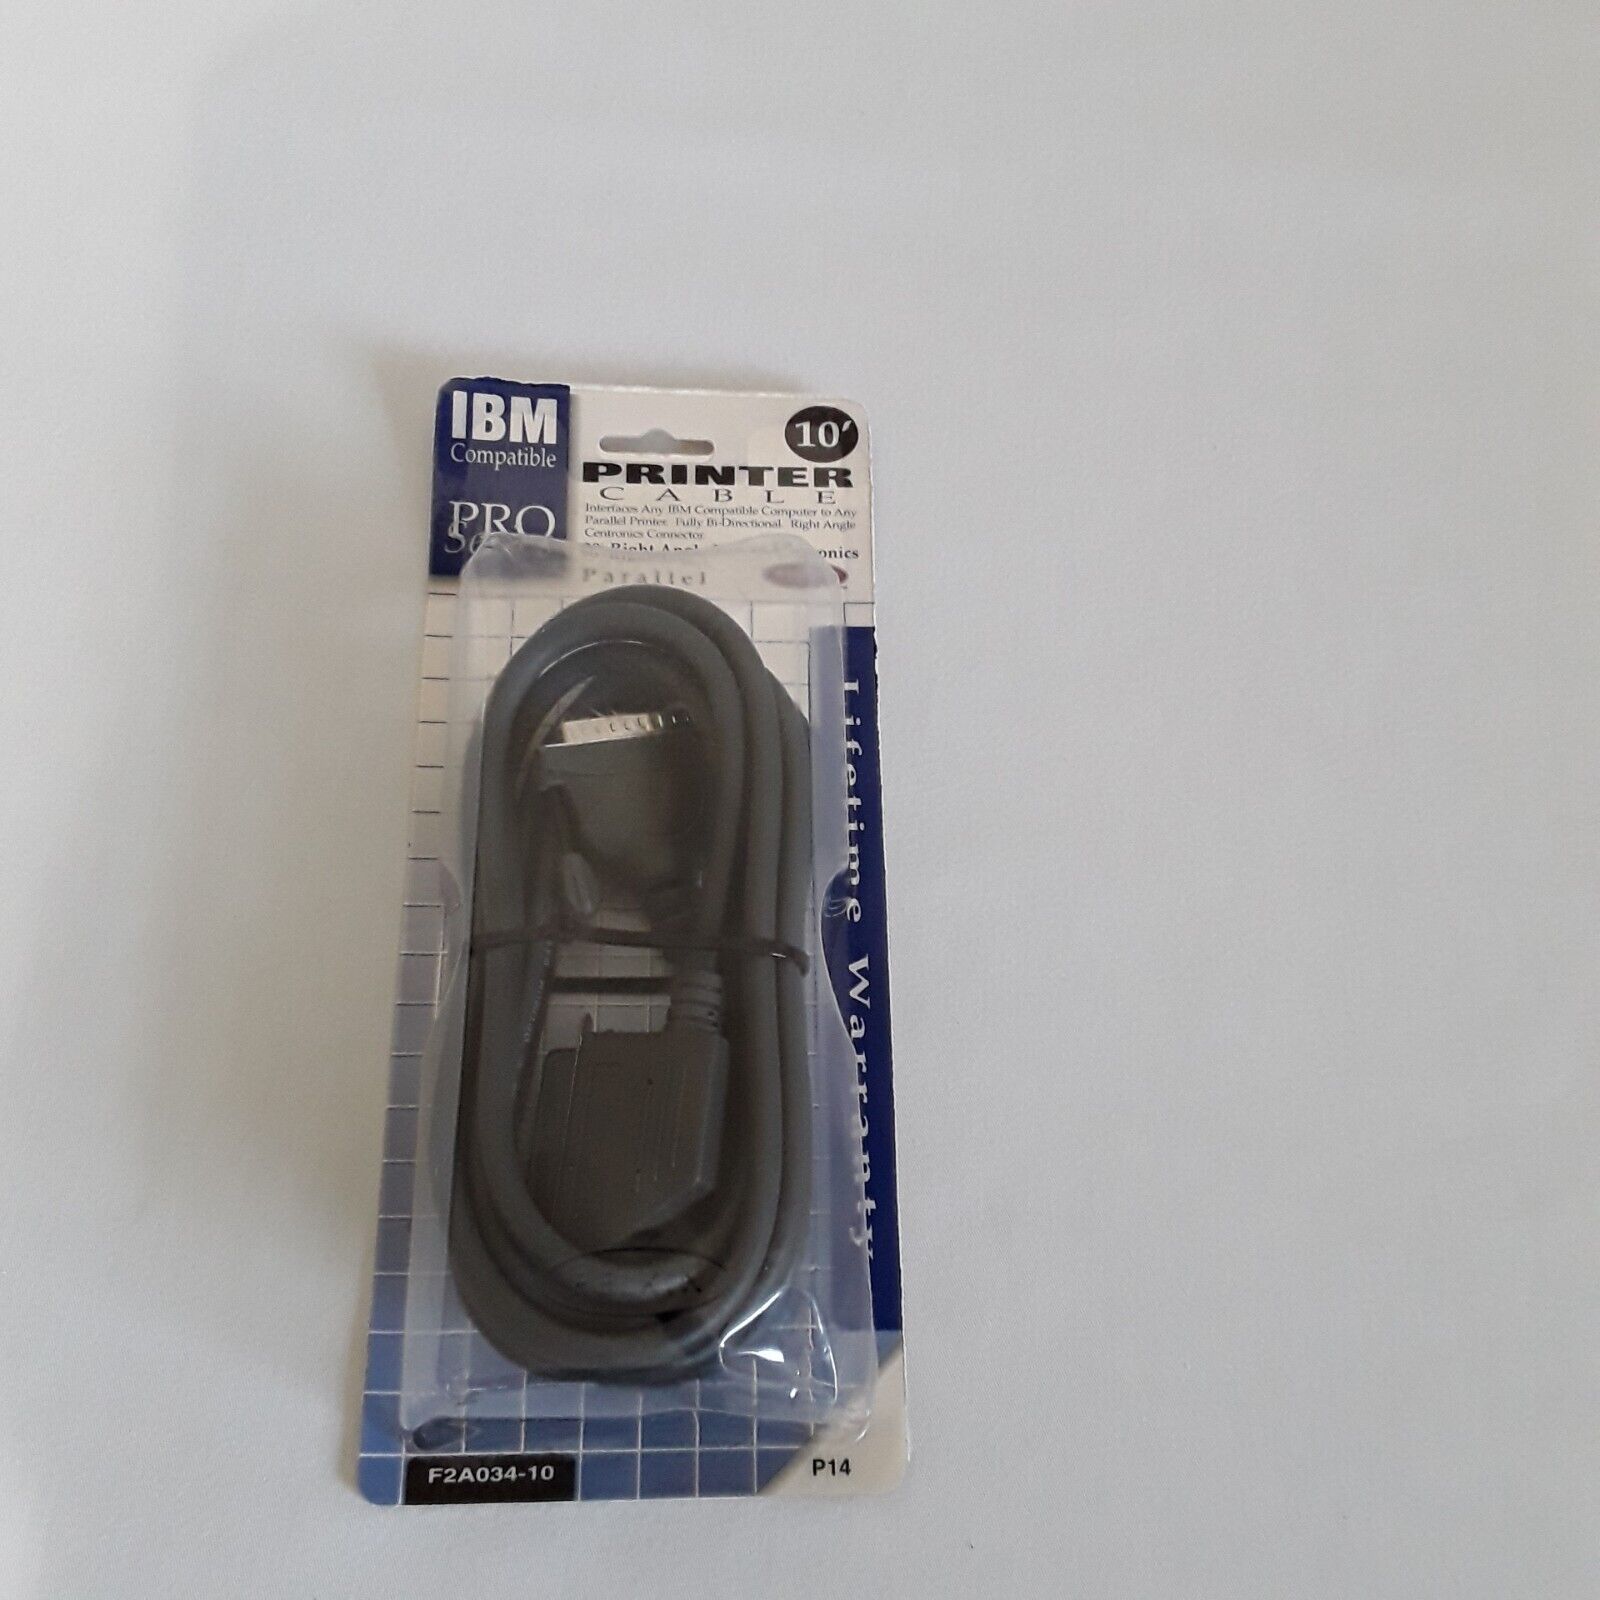 Belkin - IBM Compatible Parallel Printer Cable 10 Feet F2A034-10  Pro Series